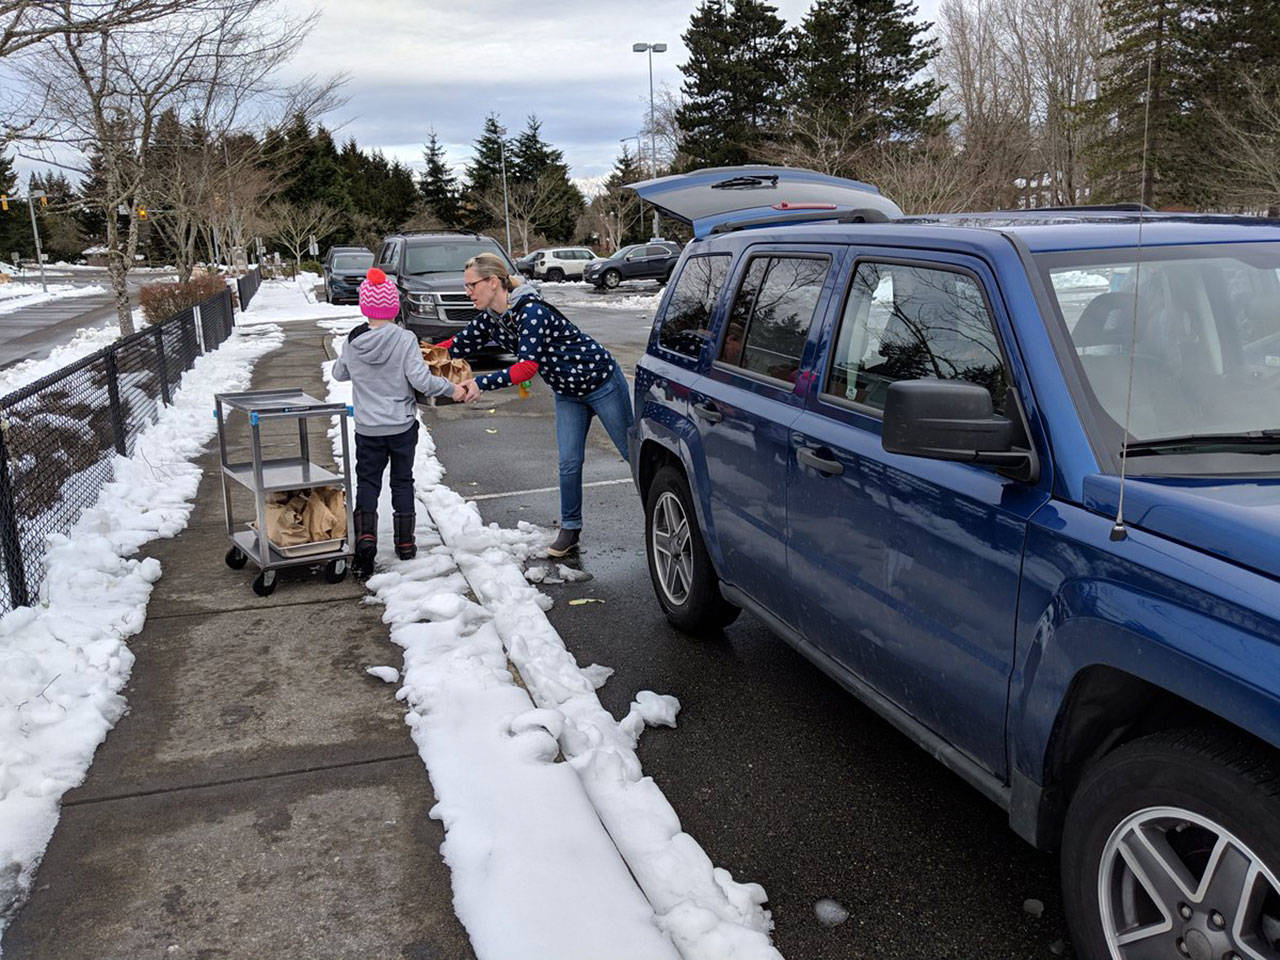 In addition to serving food at area schools, the Northshore Eats Program also delivered food to families throughout the district. Photo courtesy of Northshore School District Twitter